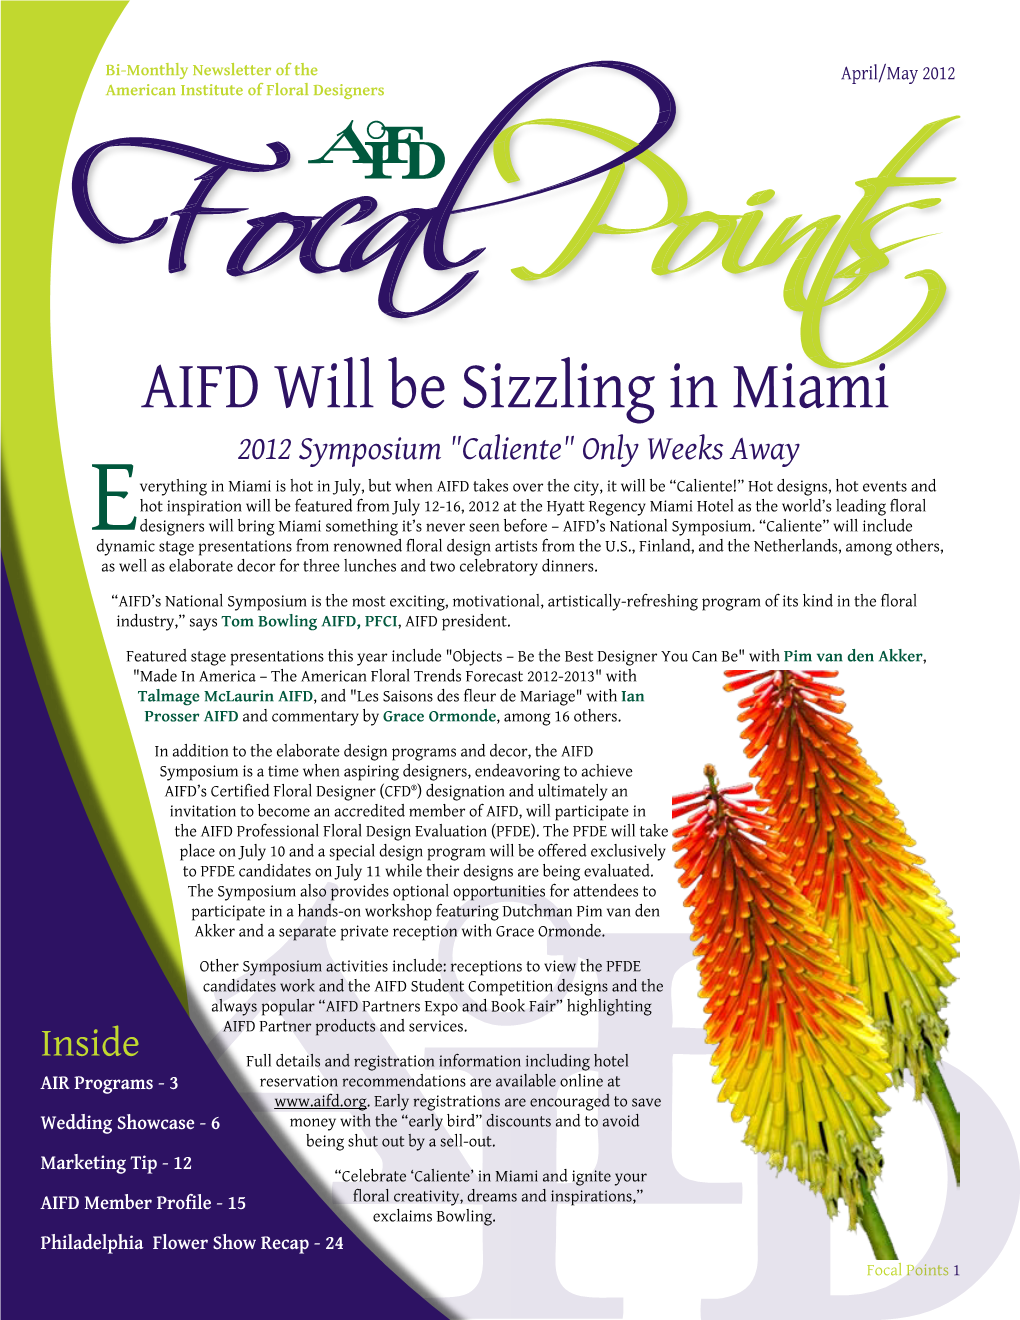 AIFD Will Be Sizzling in Miami